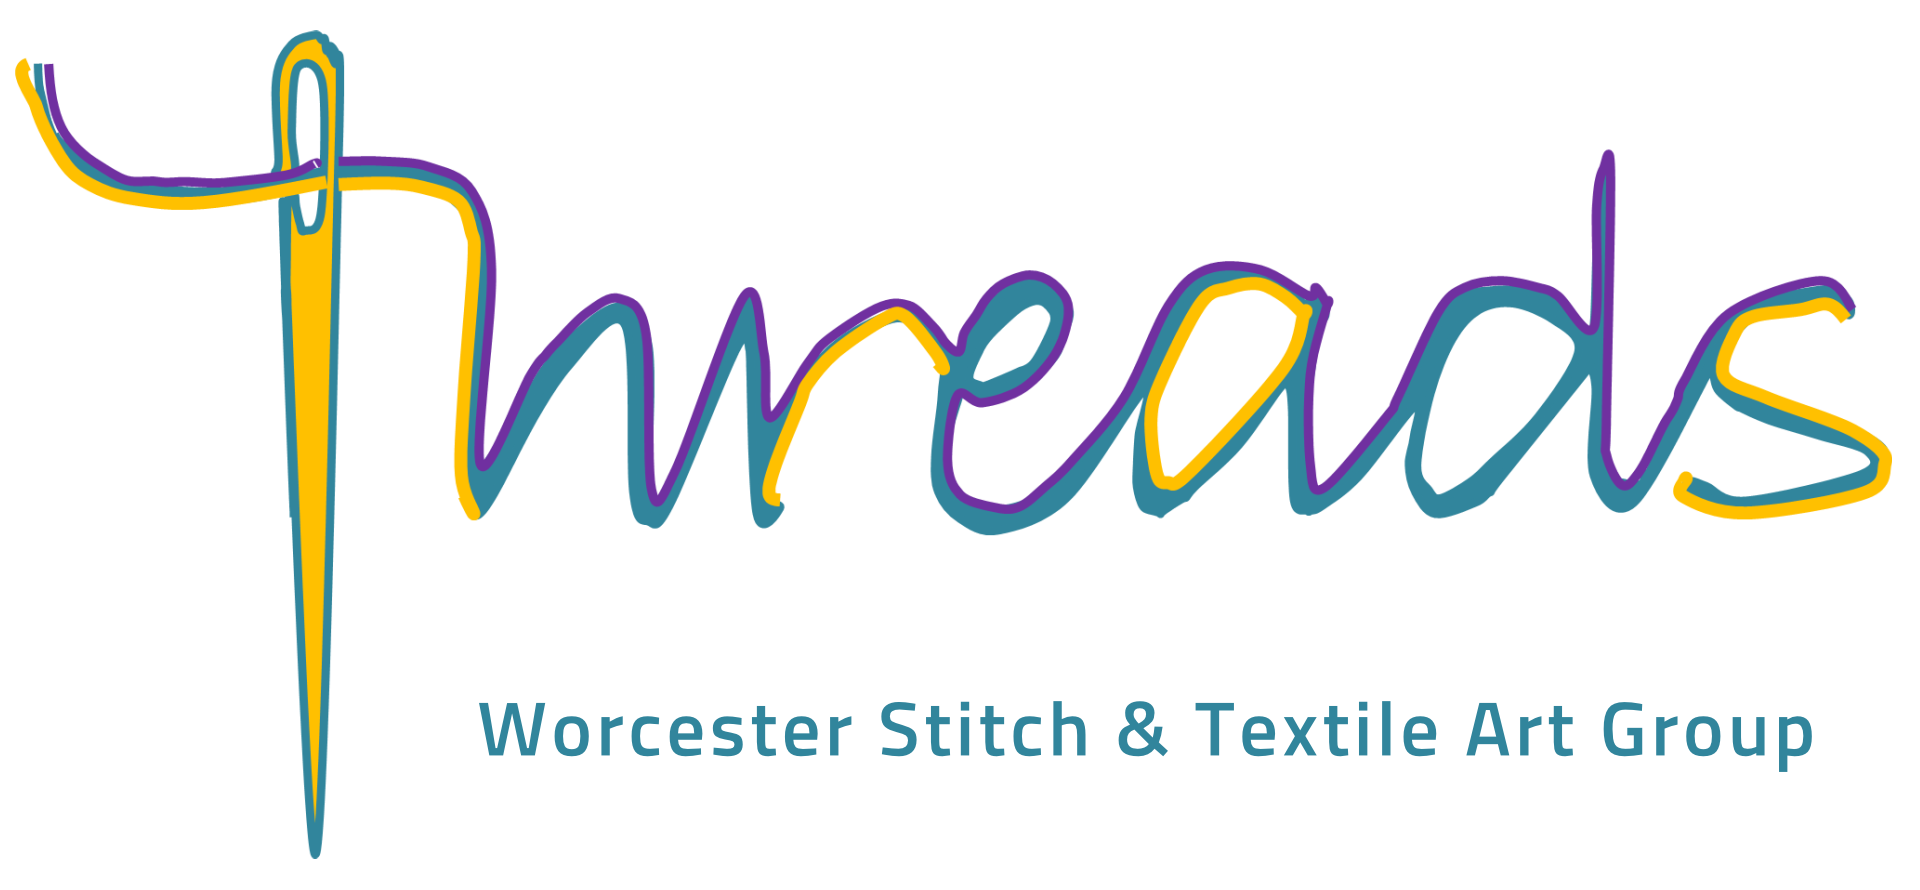 THREADS - Worcester Stitch and Textile Art Group